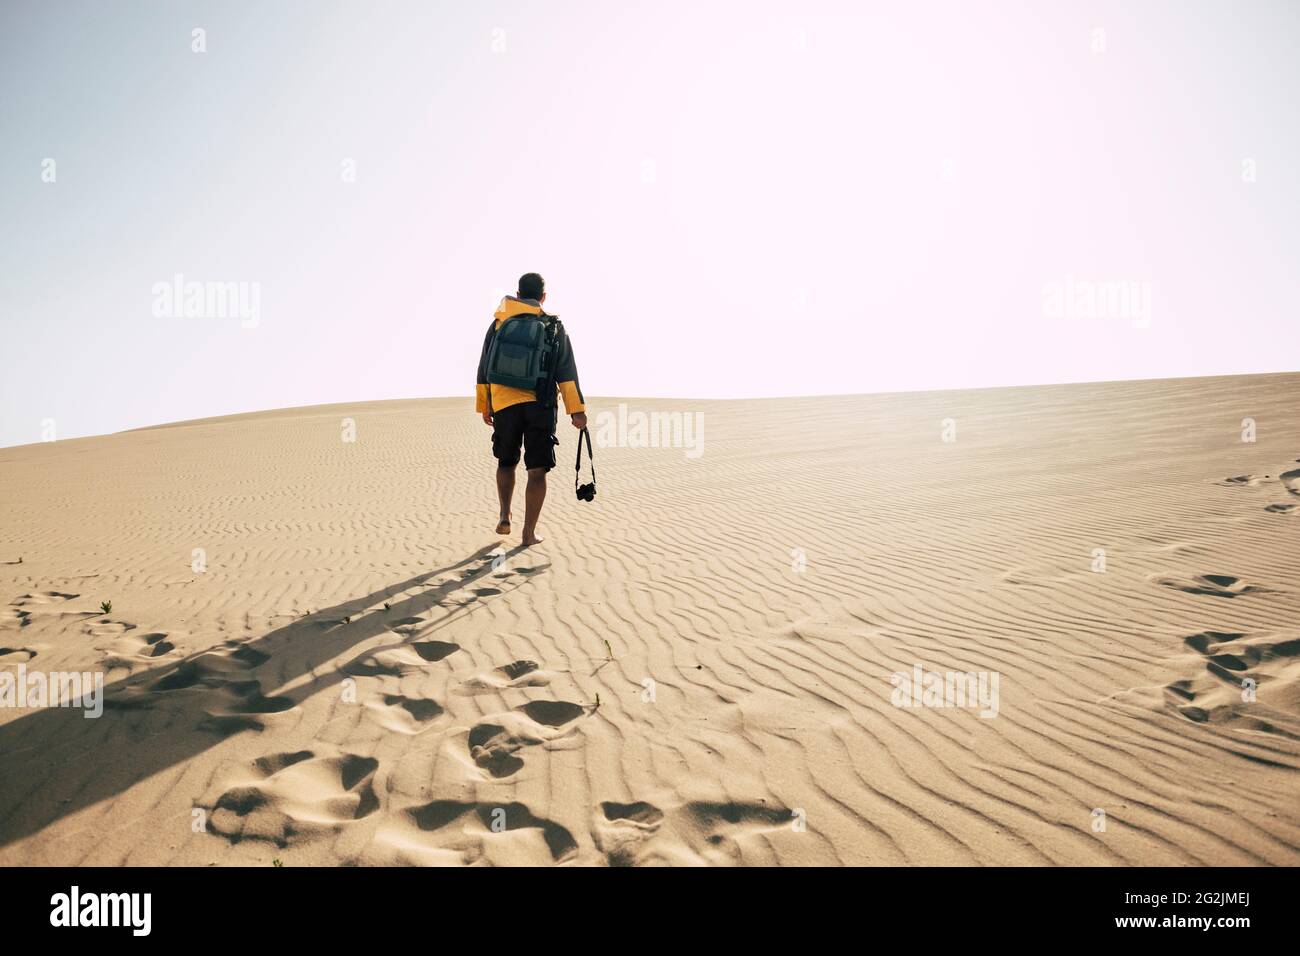 Man walking alone on desert sand dunes - explore and adventure outdoor leisure activity - camera and backpack equipment to enjoy exploration and wild landscape arid place Stock Photo